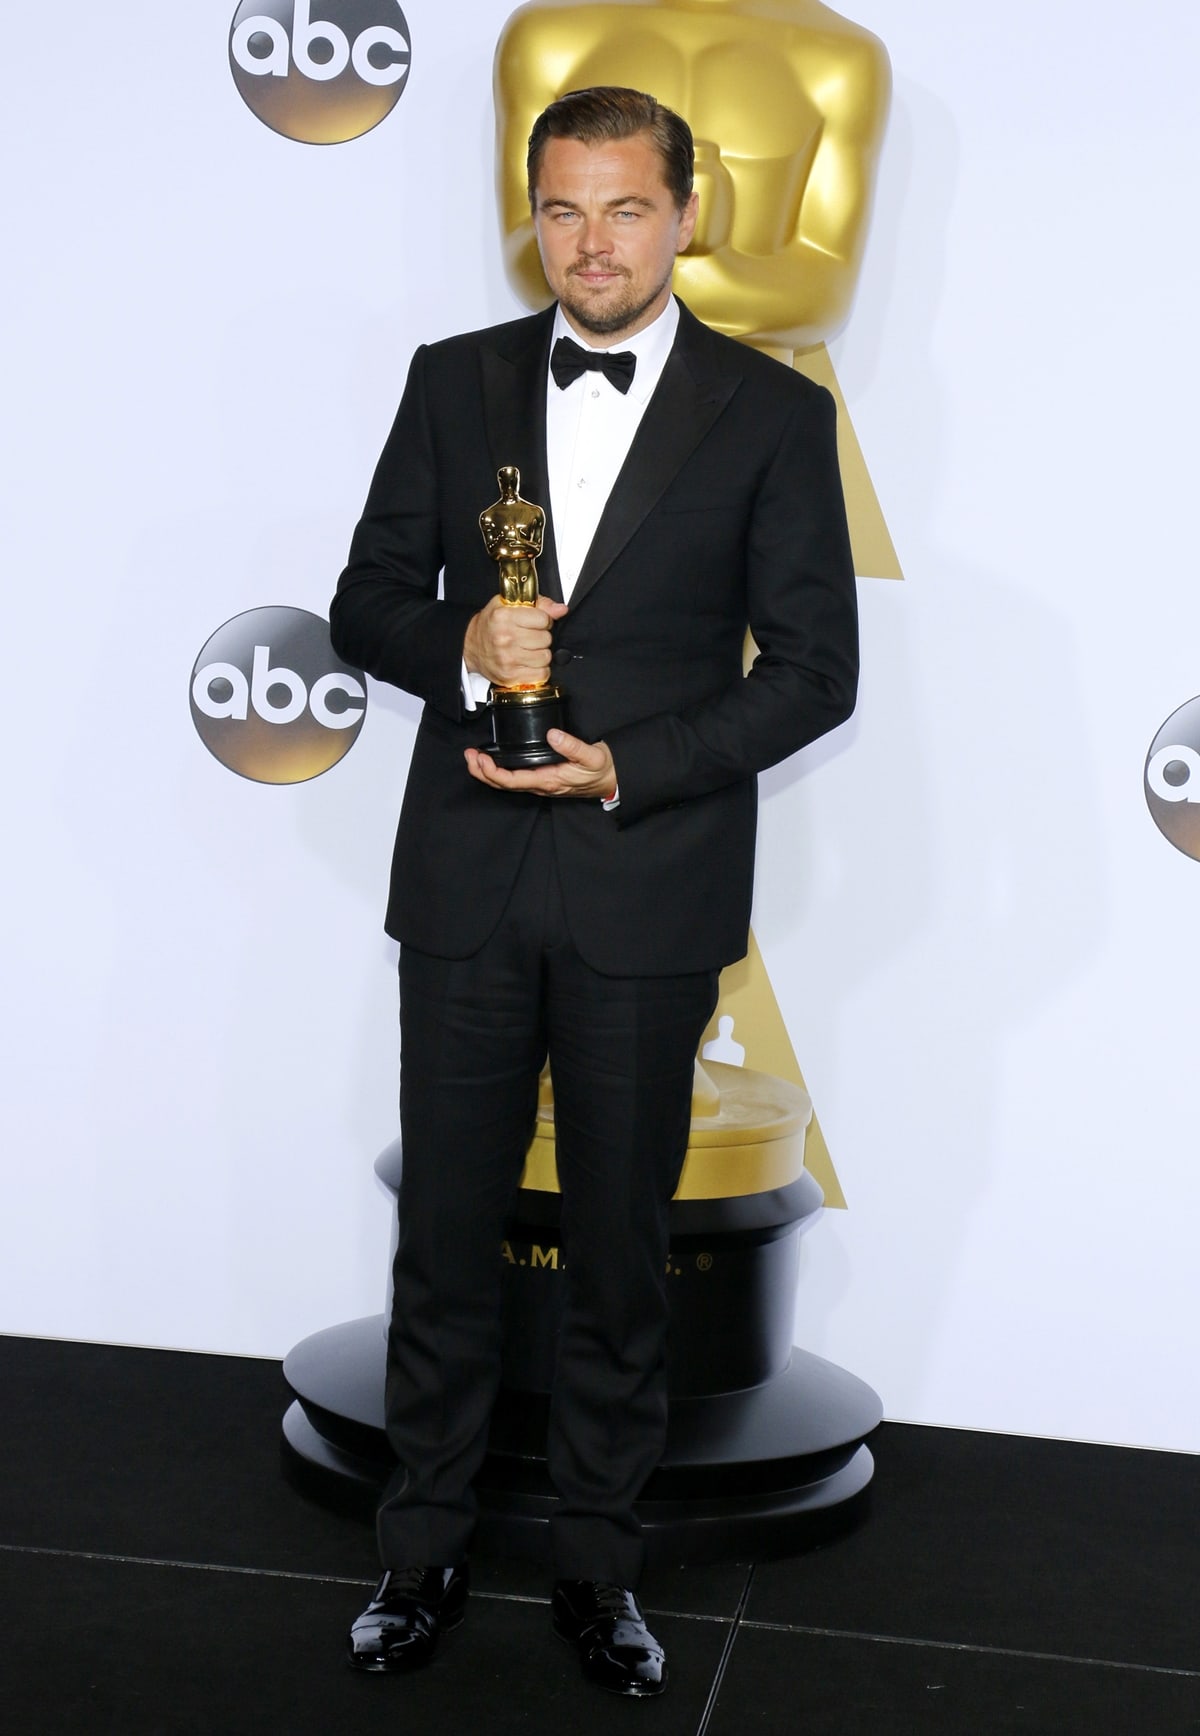 Leonardo DiCaprio won the Oscar for Best Actor in a Giorgio Armani tuxedo and Established Jewelry cufflinks at the 88th Annual Academy Awards